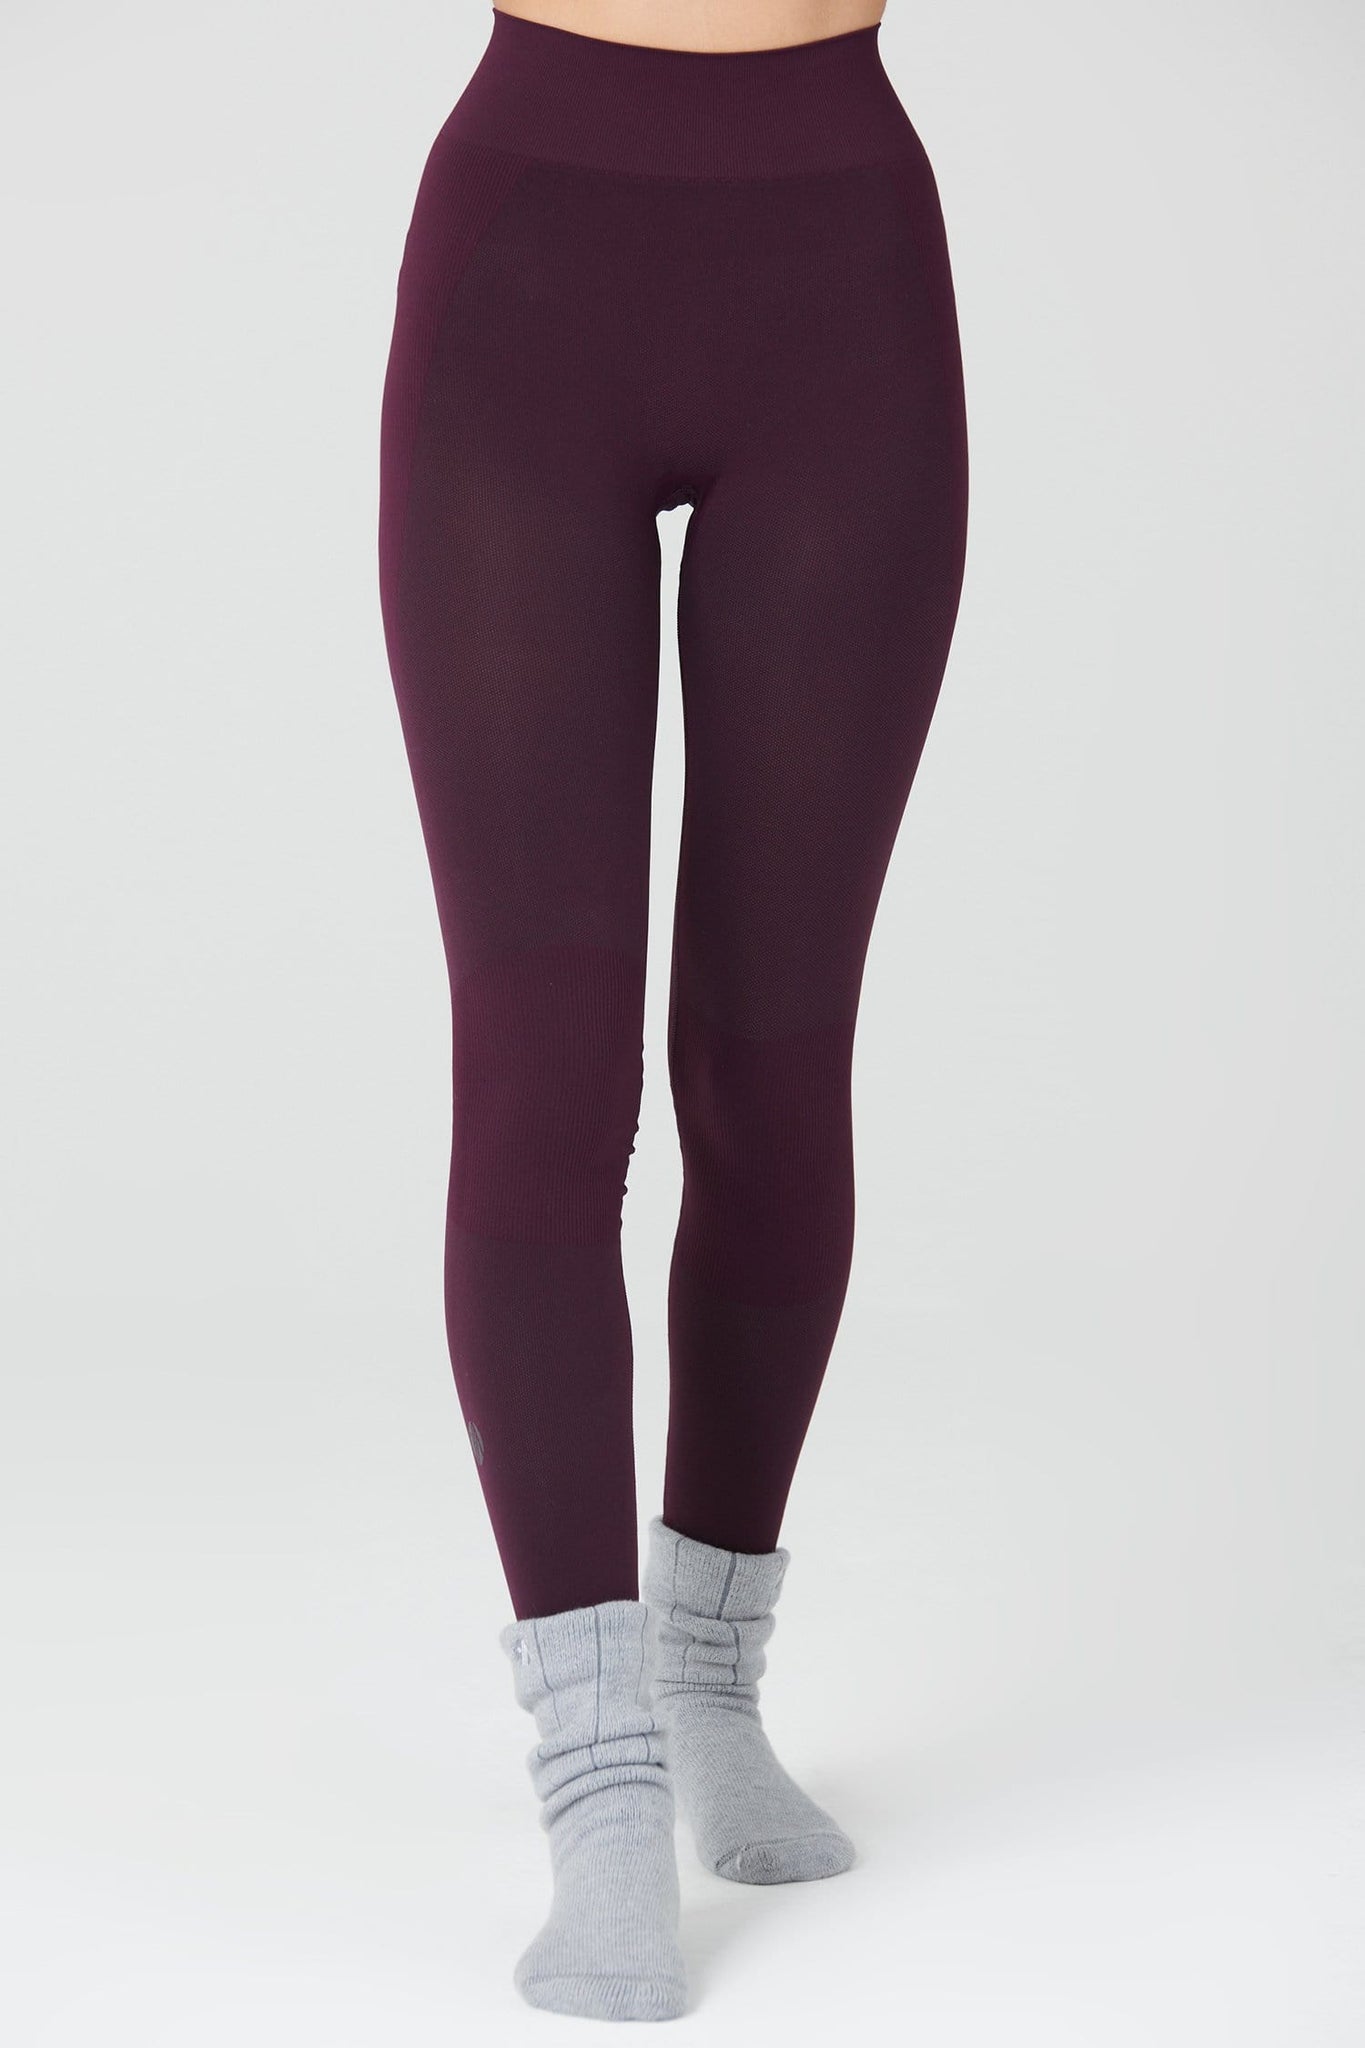 Stay Warm and Stylish with ACAI Thermal Leggings